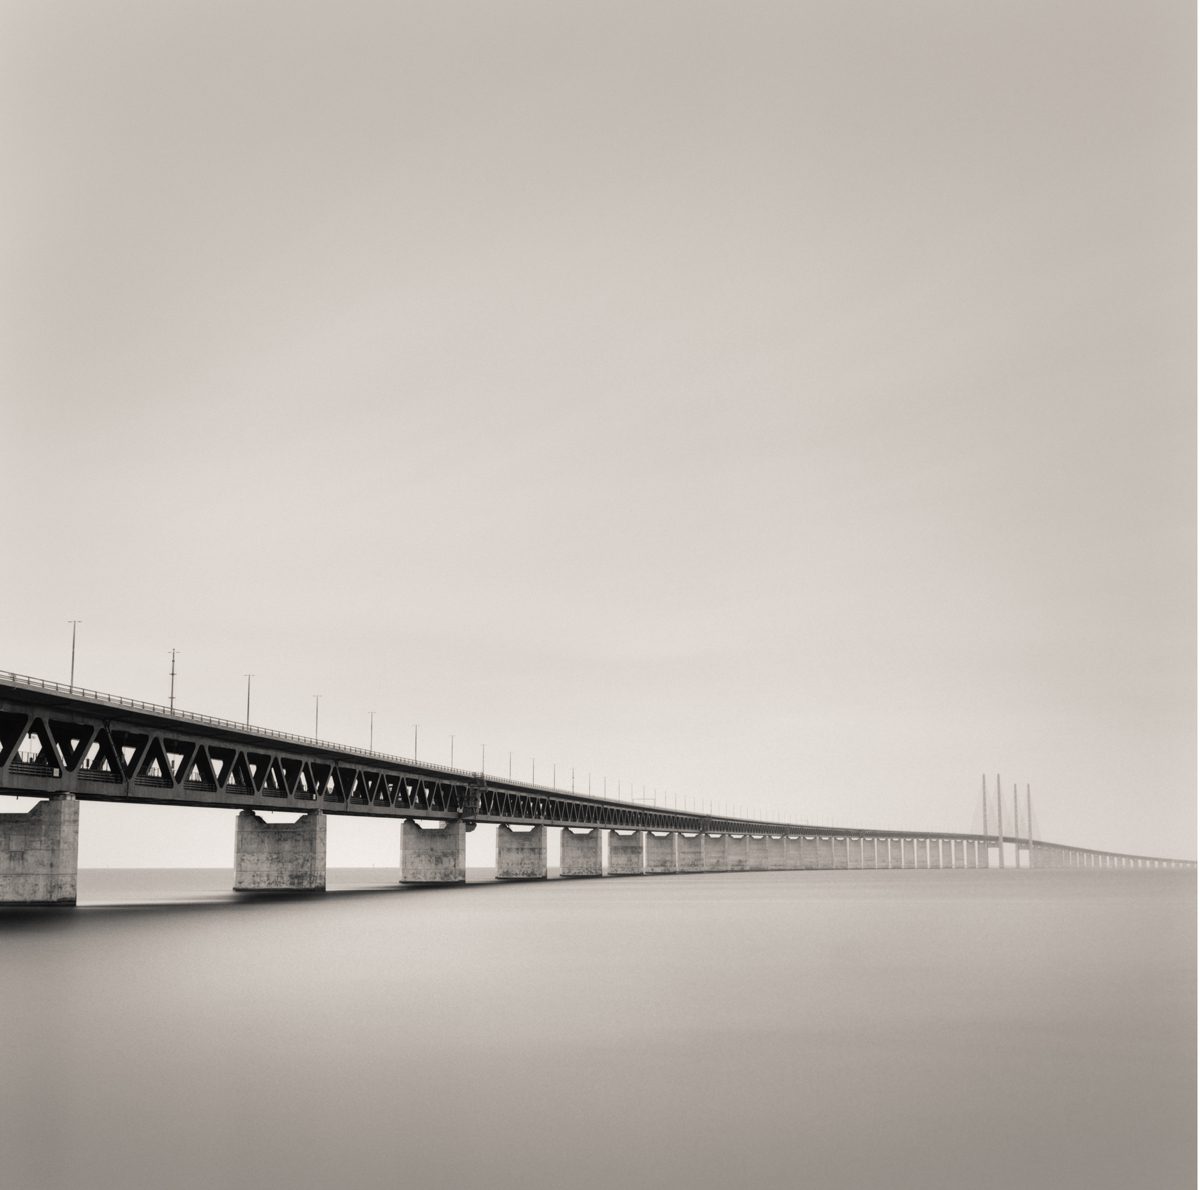 Black and white photograph of a bridge along the misty seascape